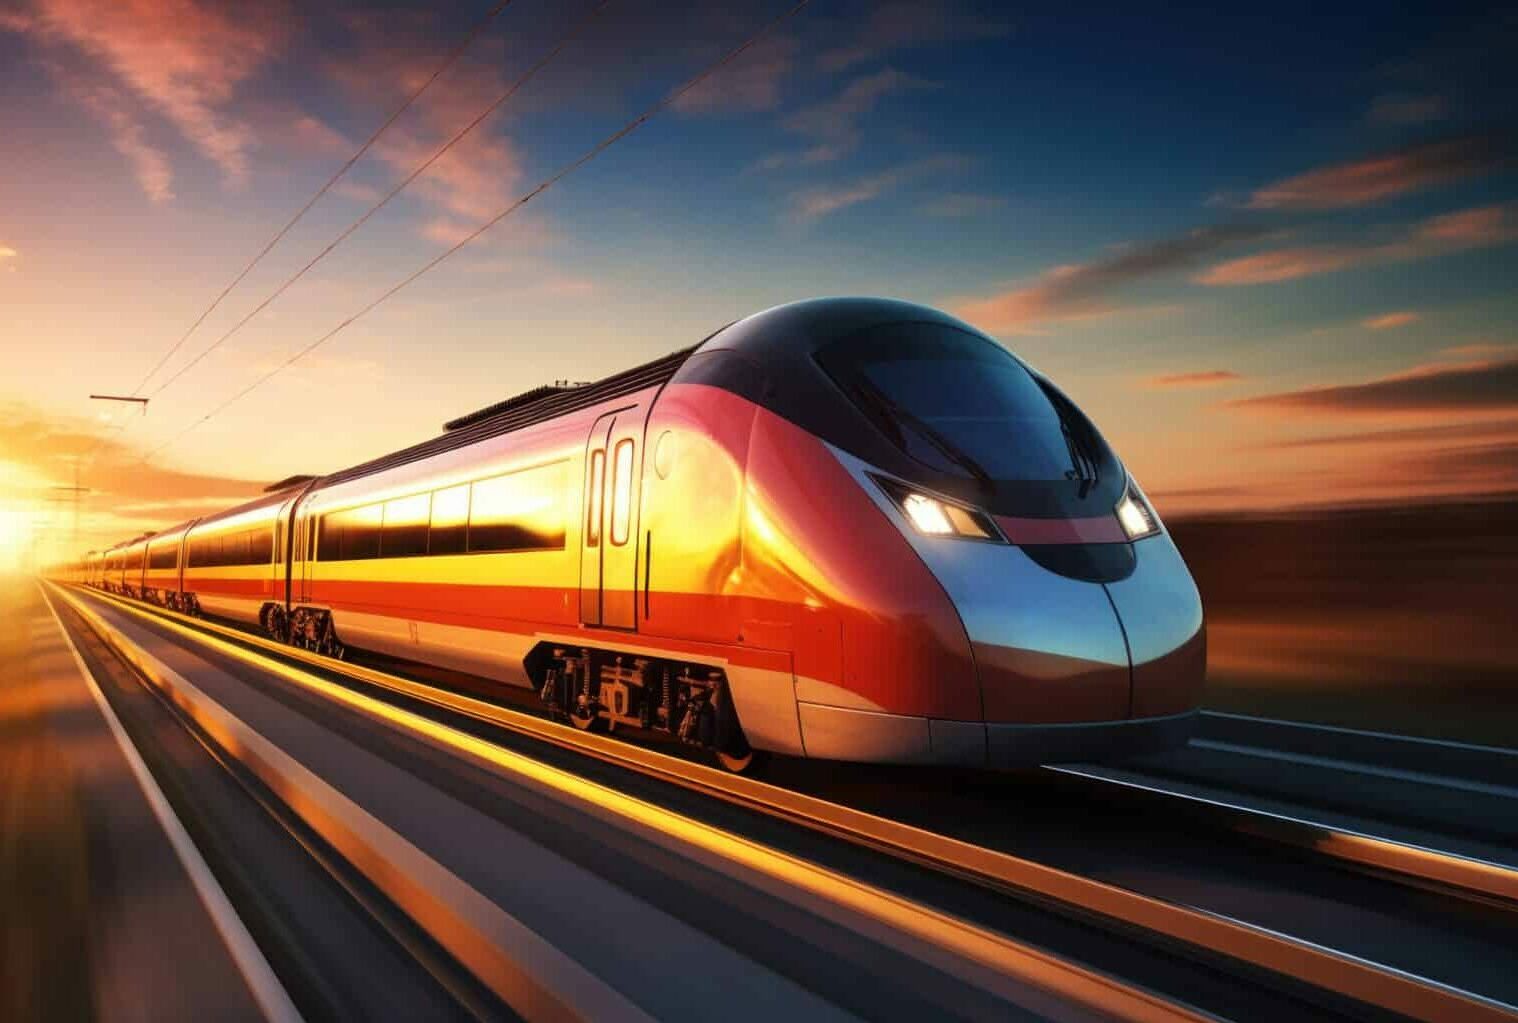 A train moves fast at dusk, showing the speed of modern travel.